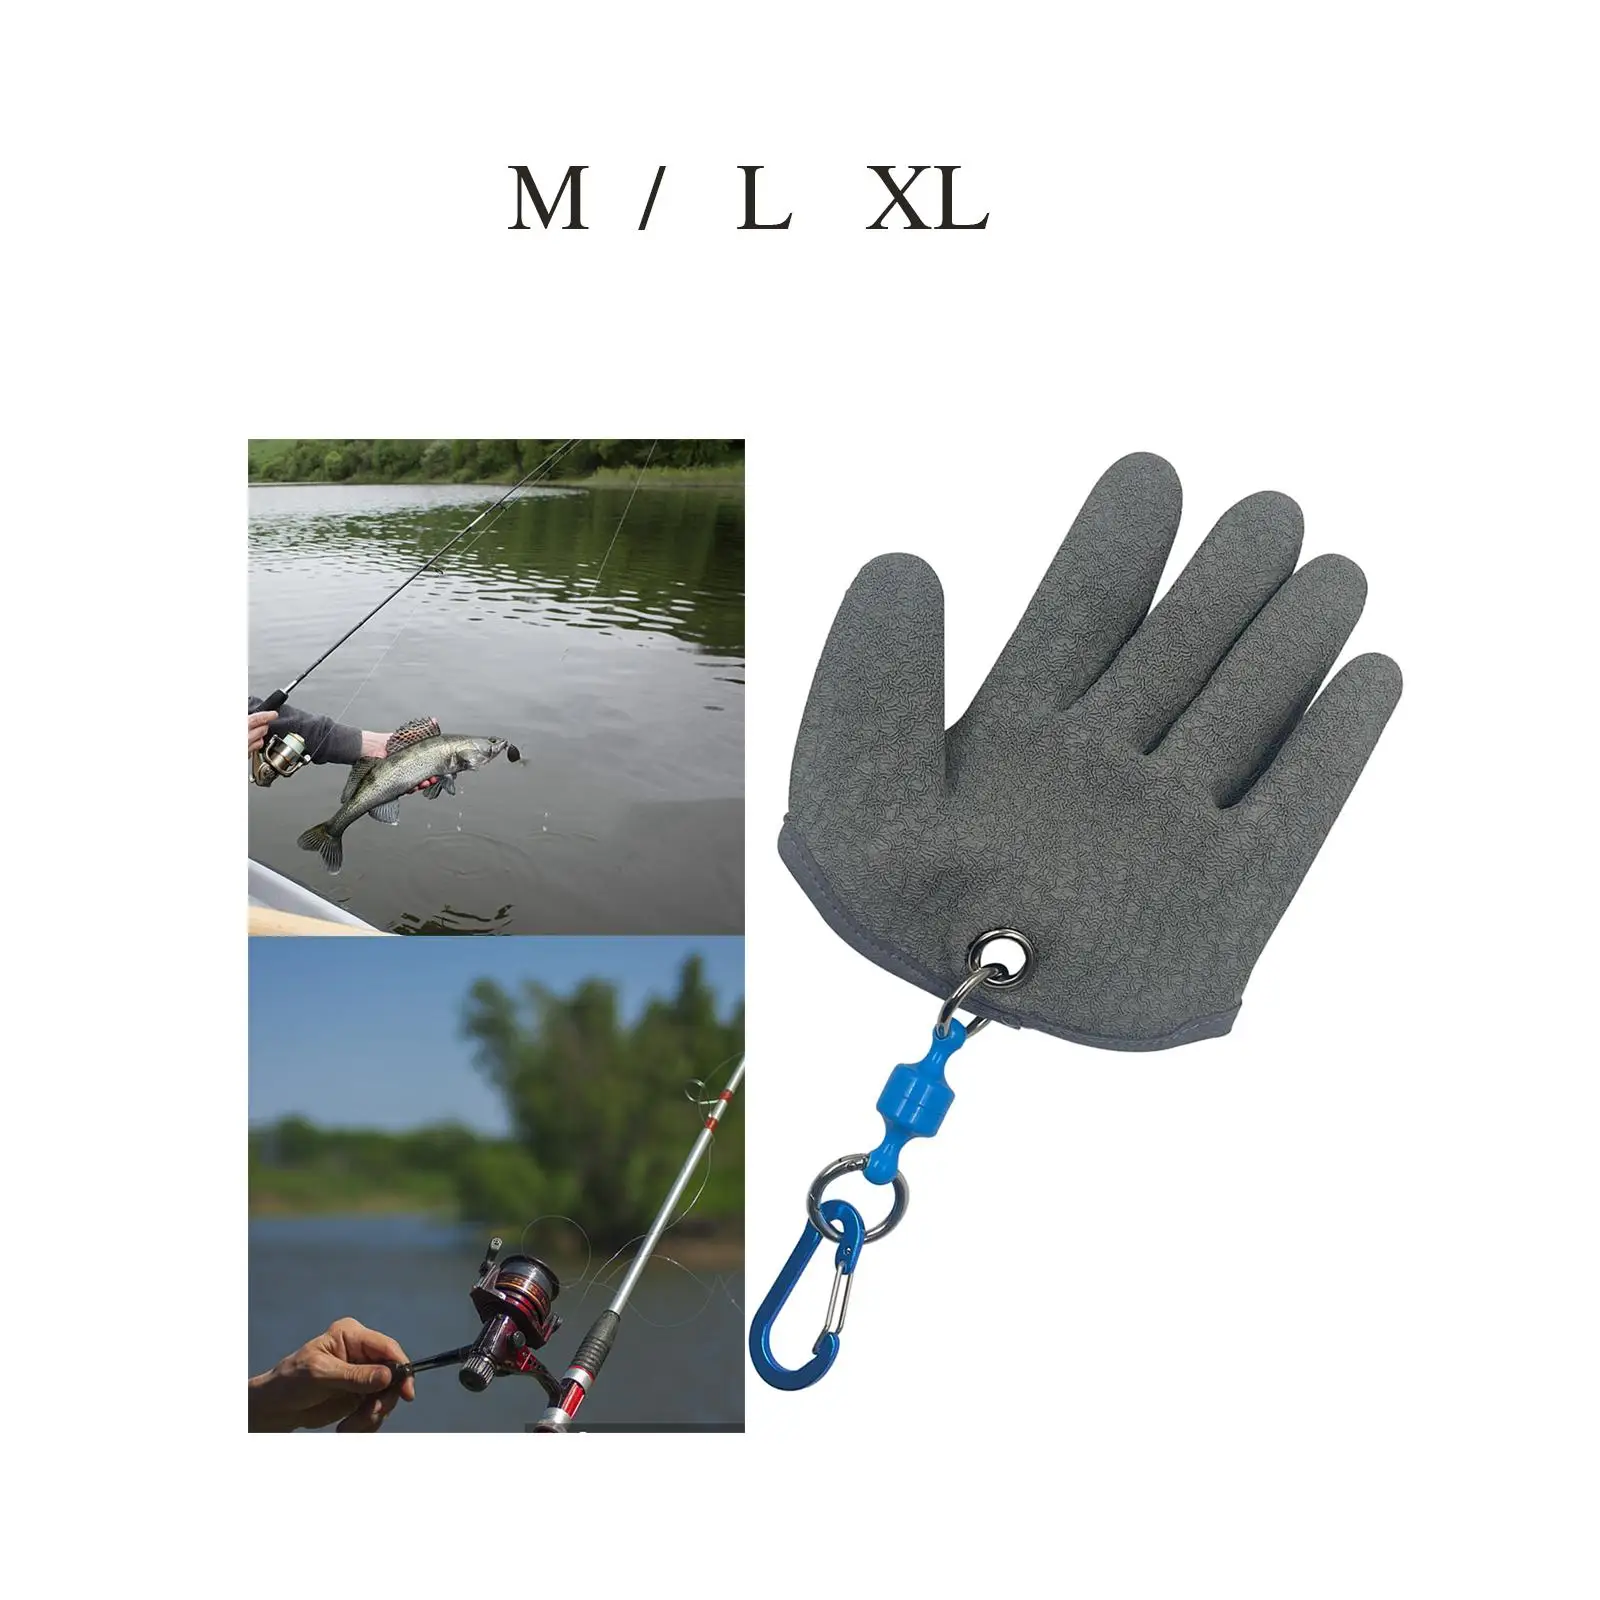 Left Hand Fish Glove Punctureproof Professional Hunting Glove Fishing Glove Cut Resistant for Outdoor Activities Catch Fish